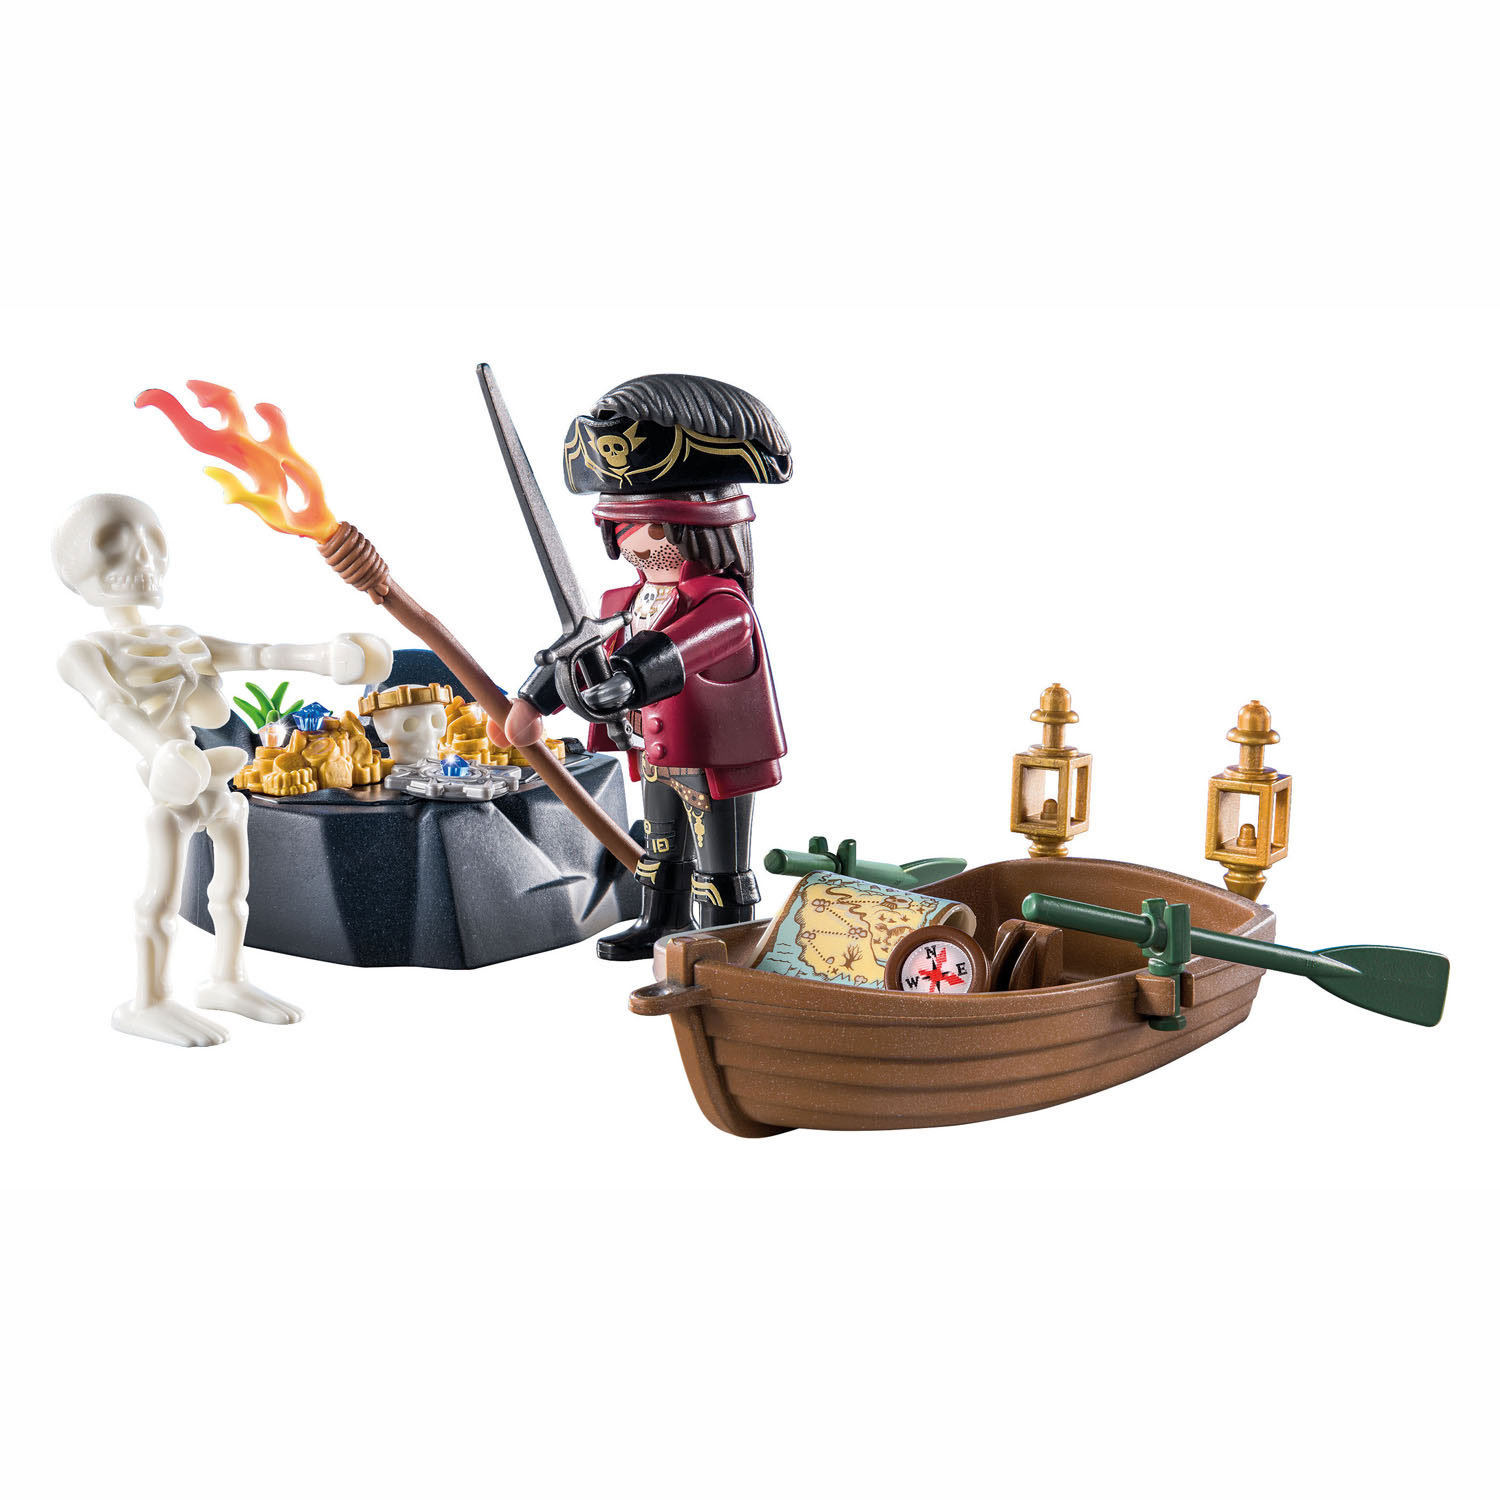 Playmobil Starterpack Pirate with Rowing Boat 71254 Toys